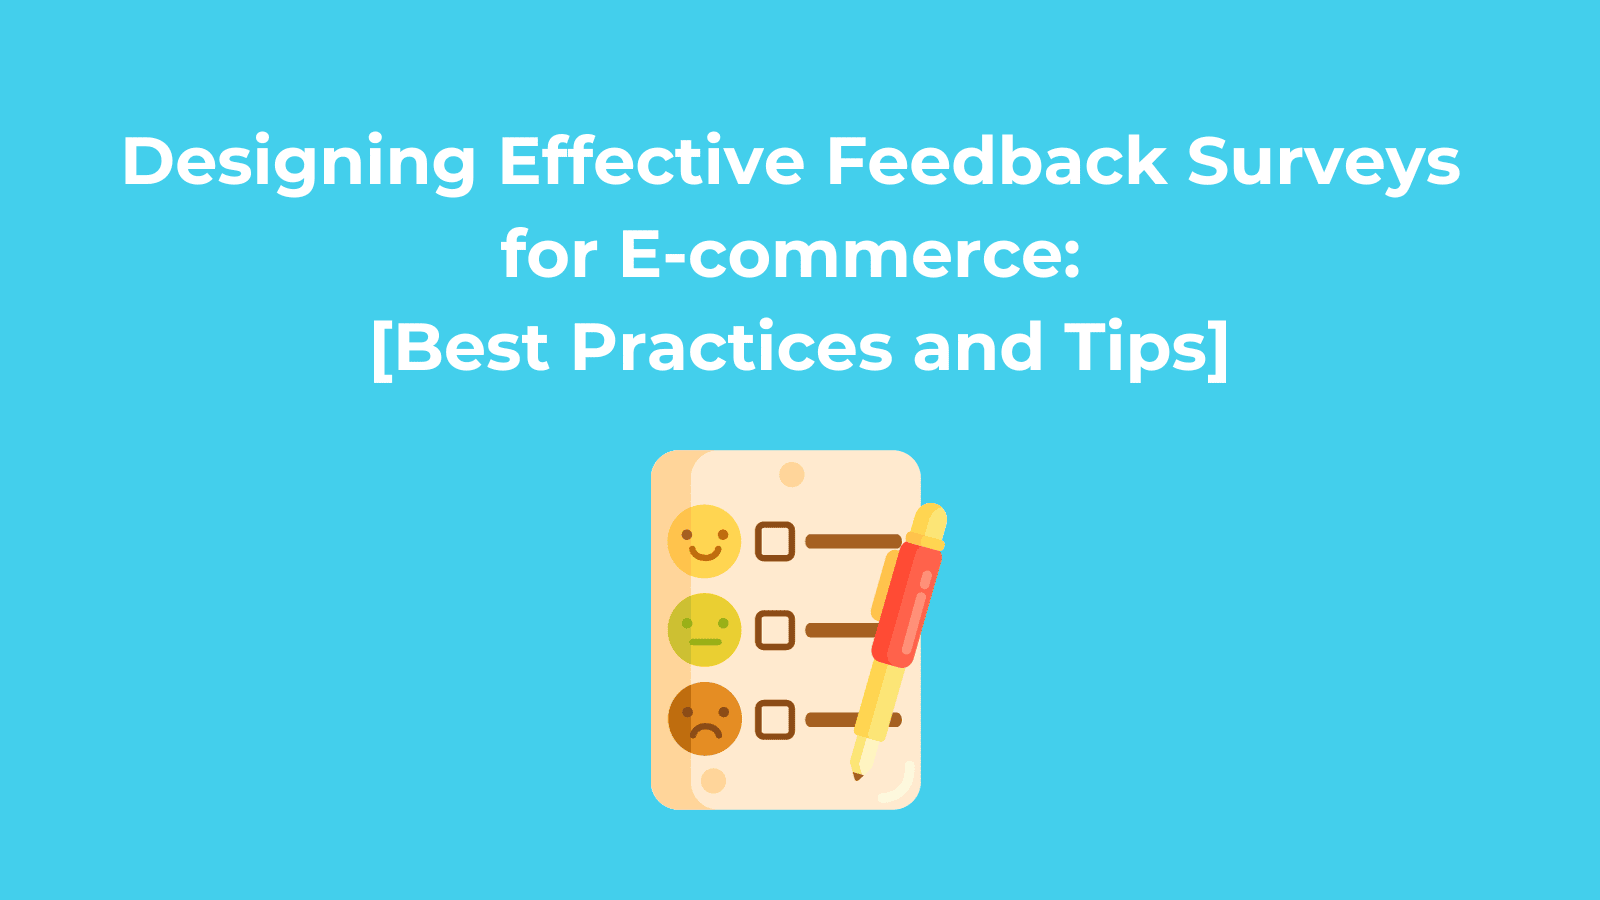 Designing Effective Feedback Surveys for E-commerce Best Practices and Tips